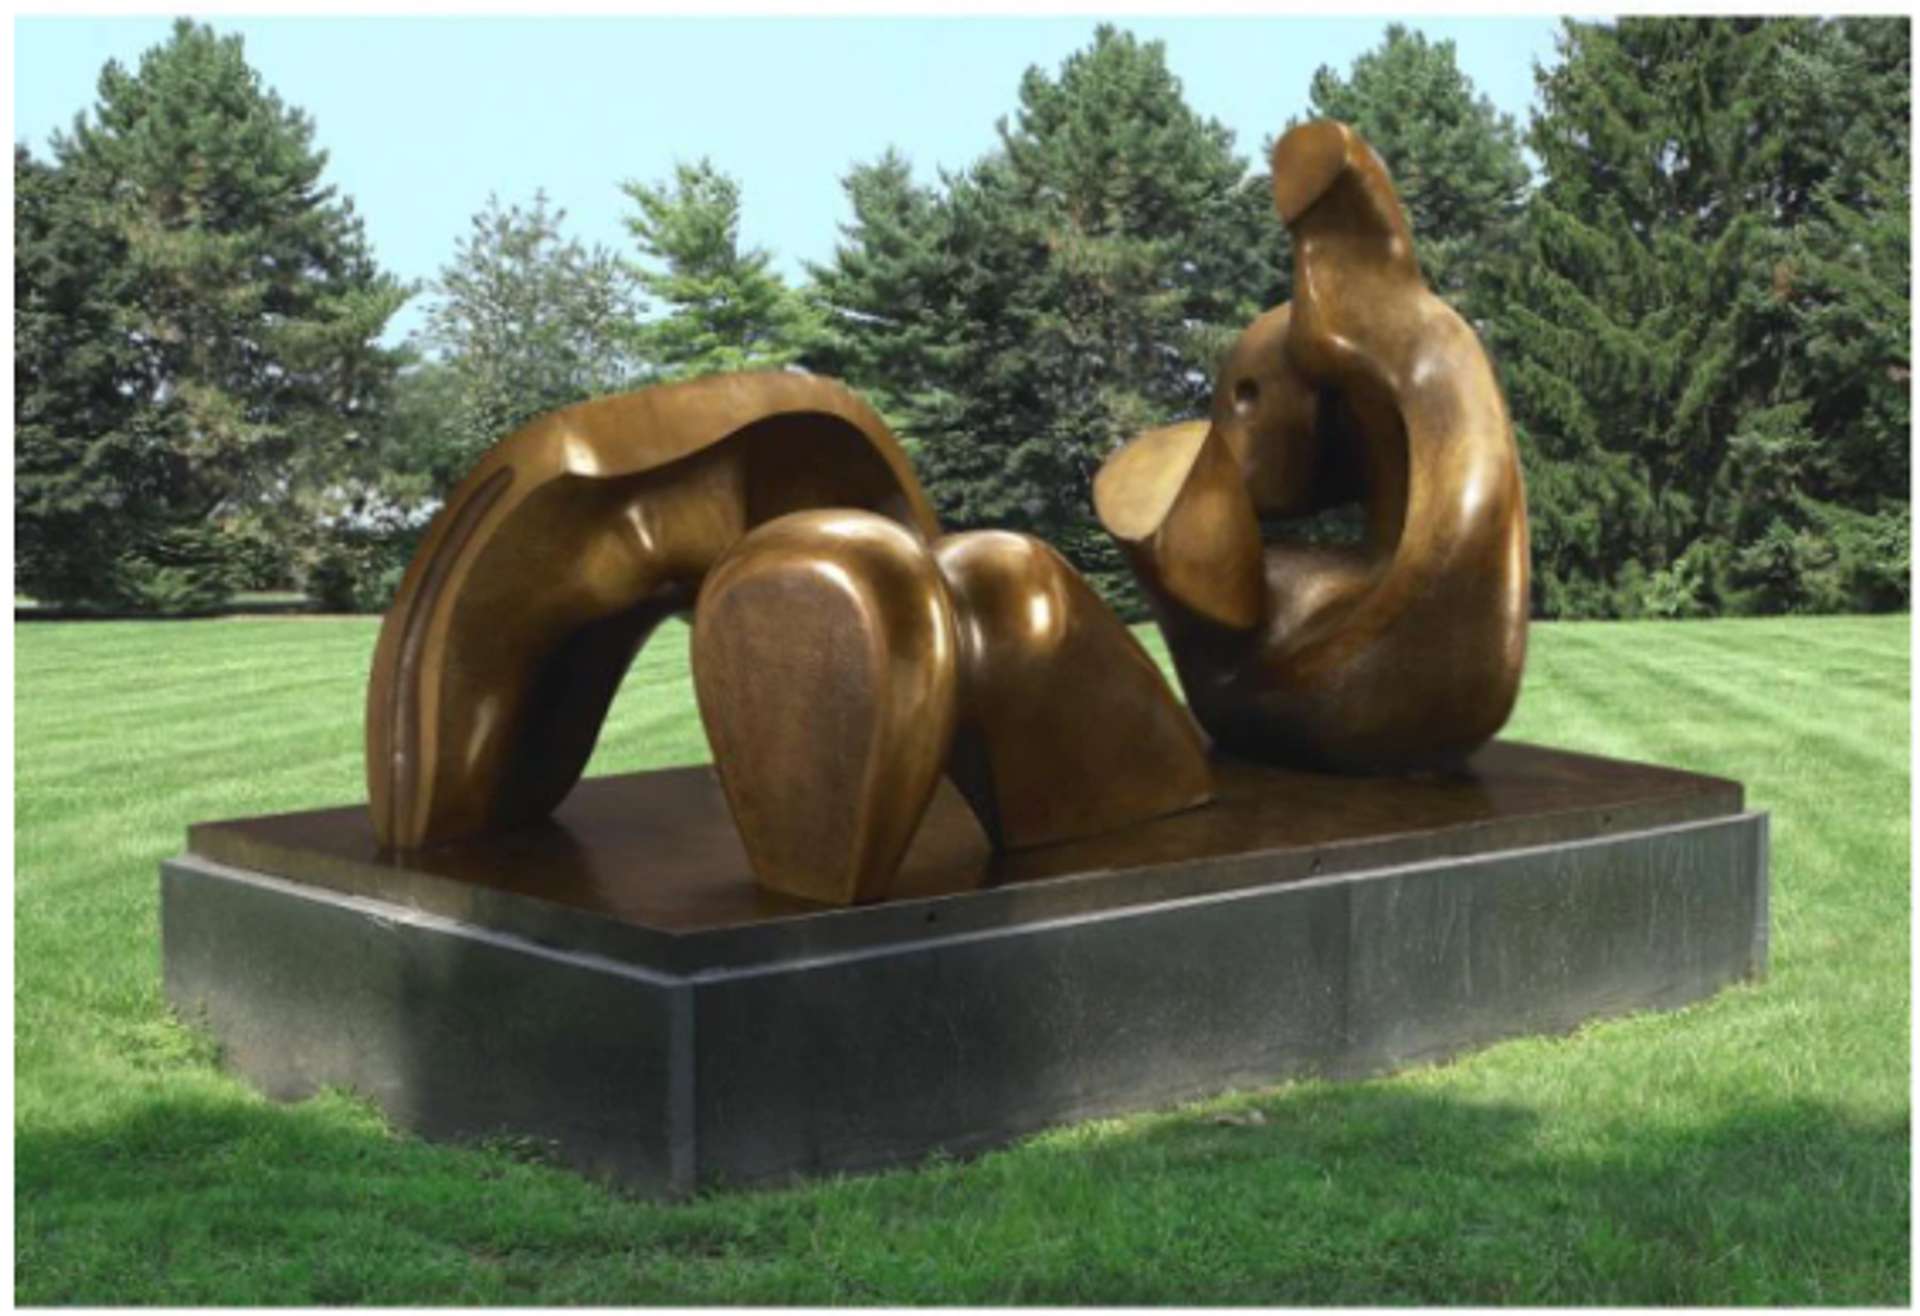  A large-scale bronze sculpture by Henry Moore depicting a reclining figure in three fragmented parts. The sculpture is situated outdoors on an elevated pedestal.